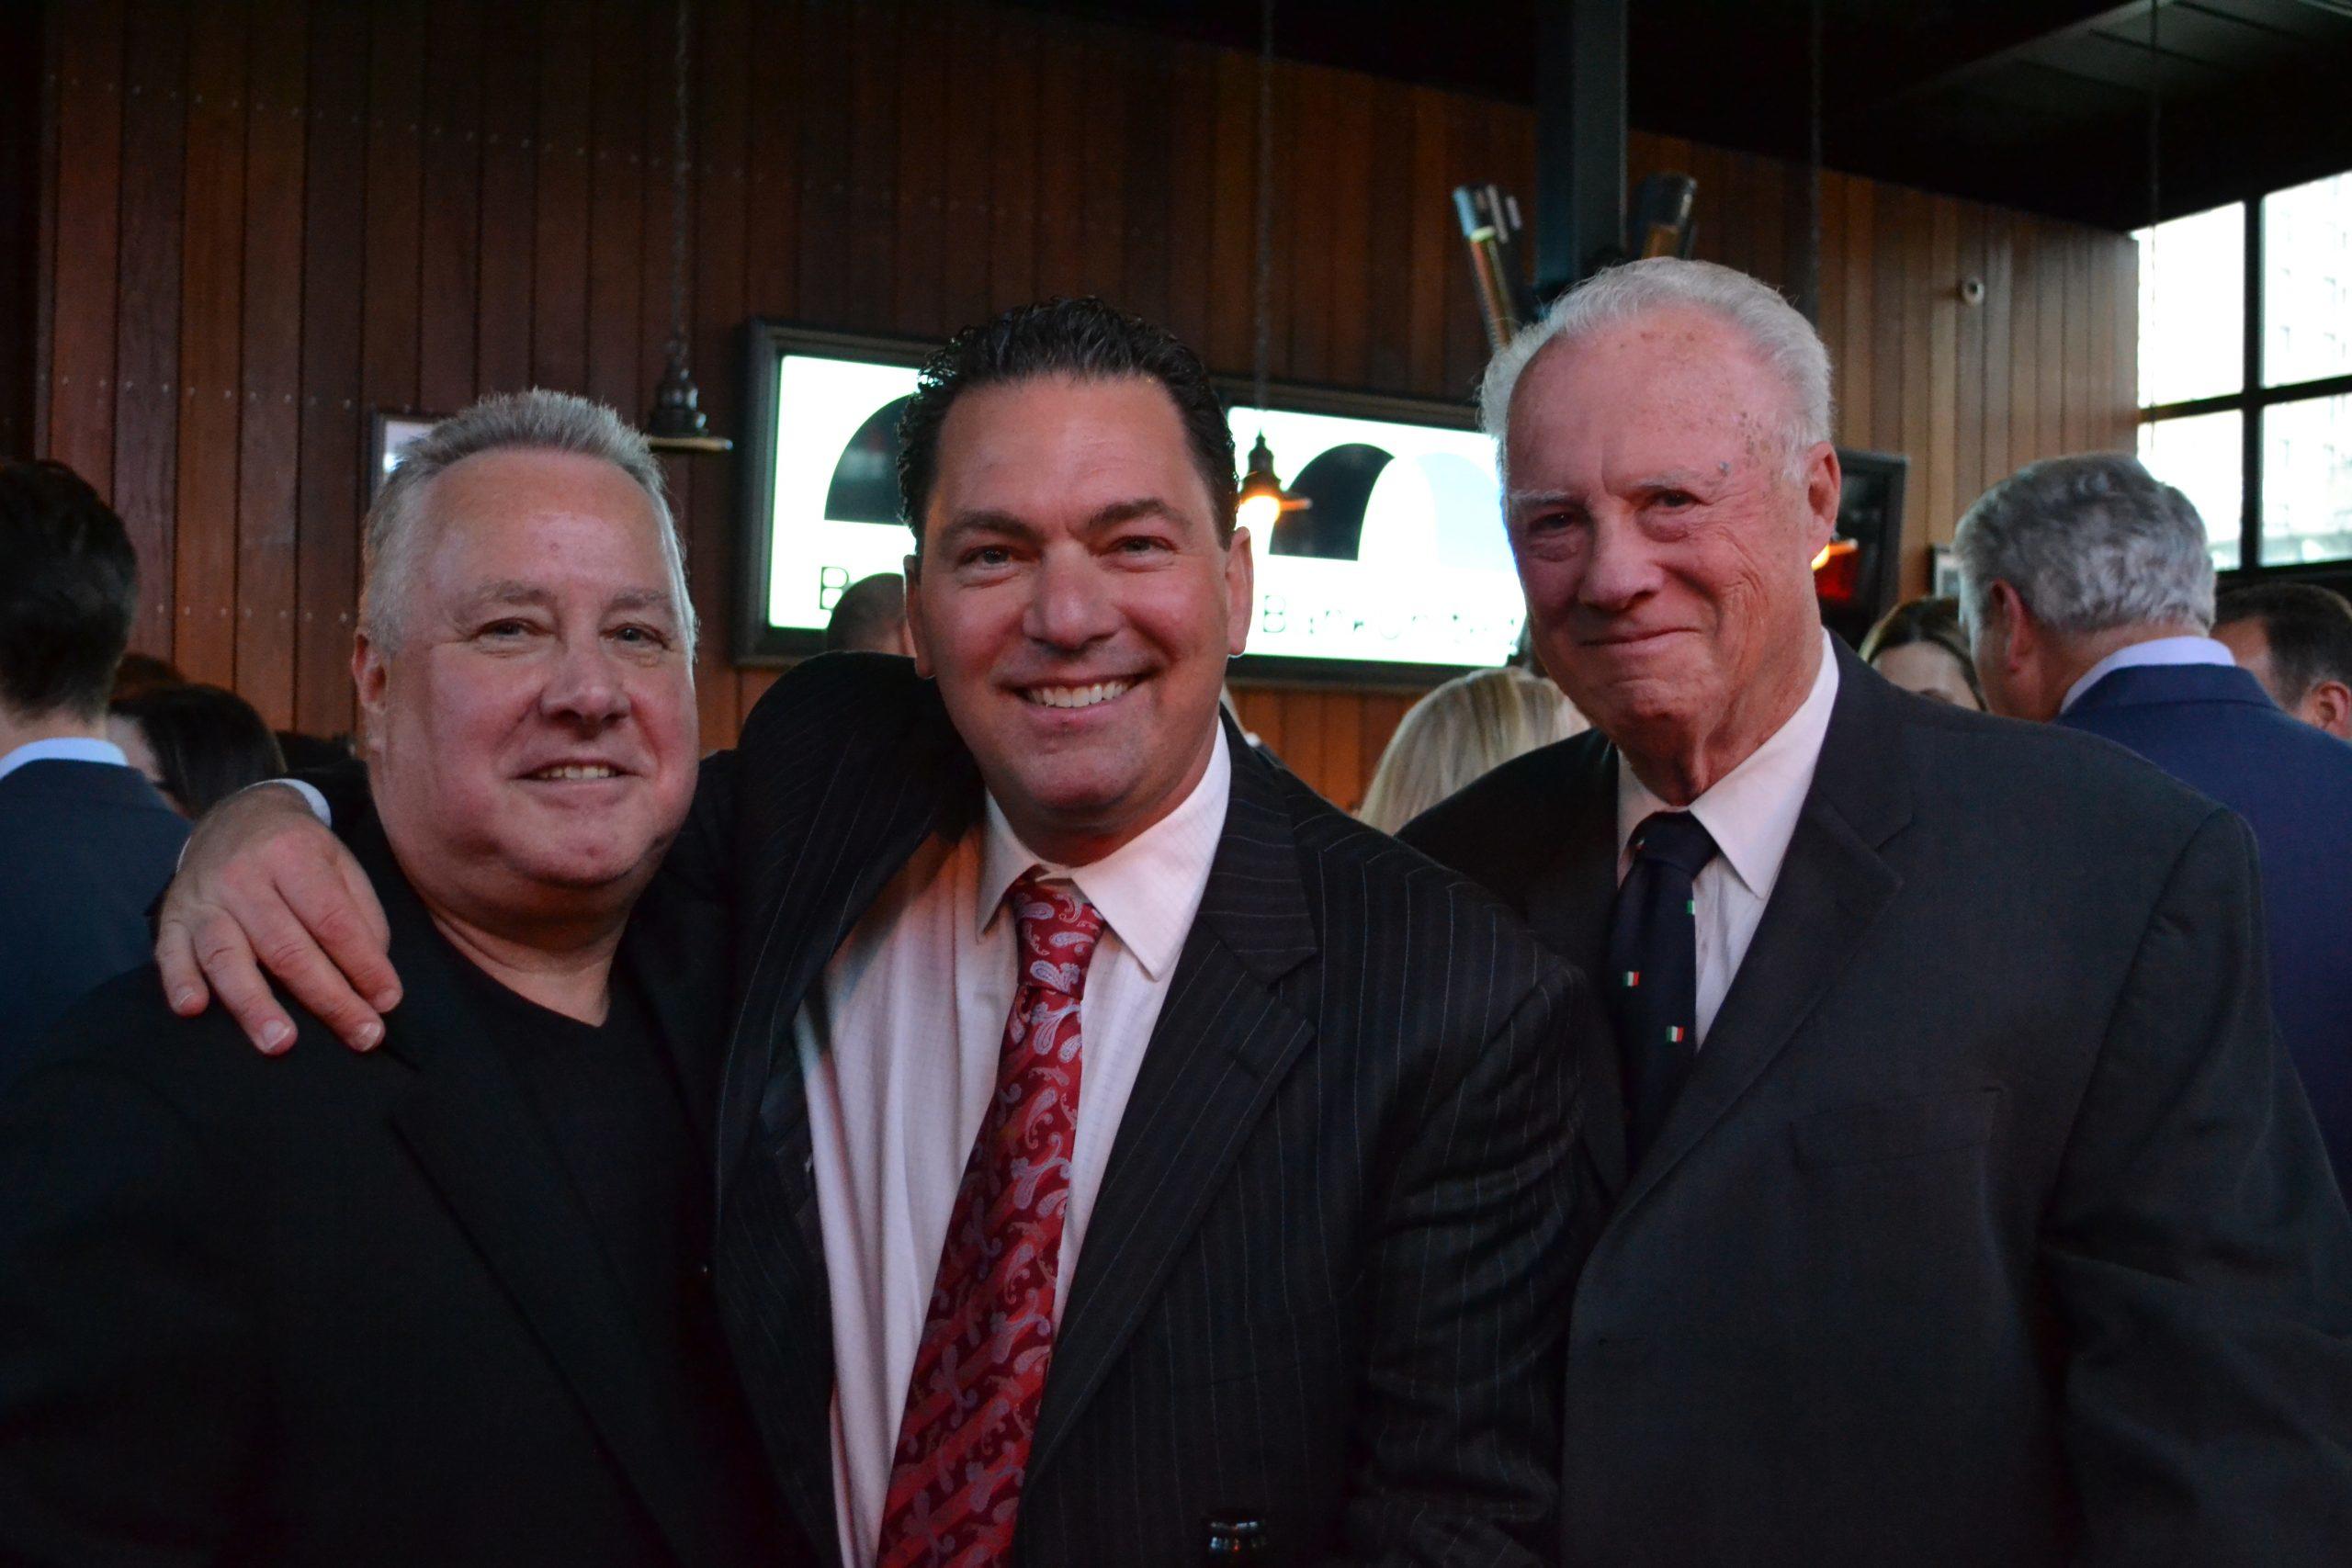 From left: Robert Zalud President of Service, Donald Gelestino President &amp; CEO, George Deering Director